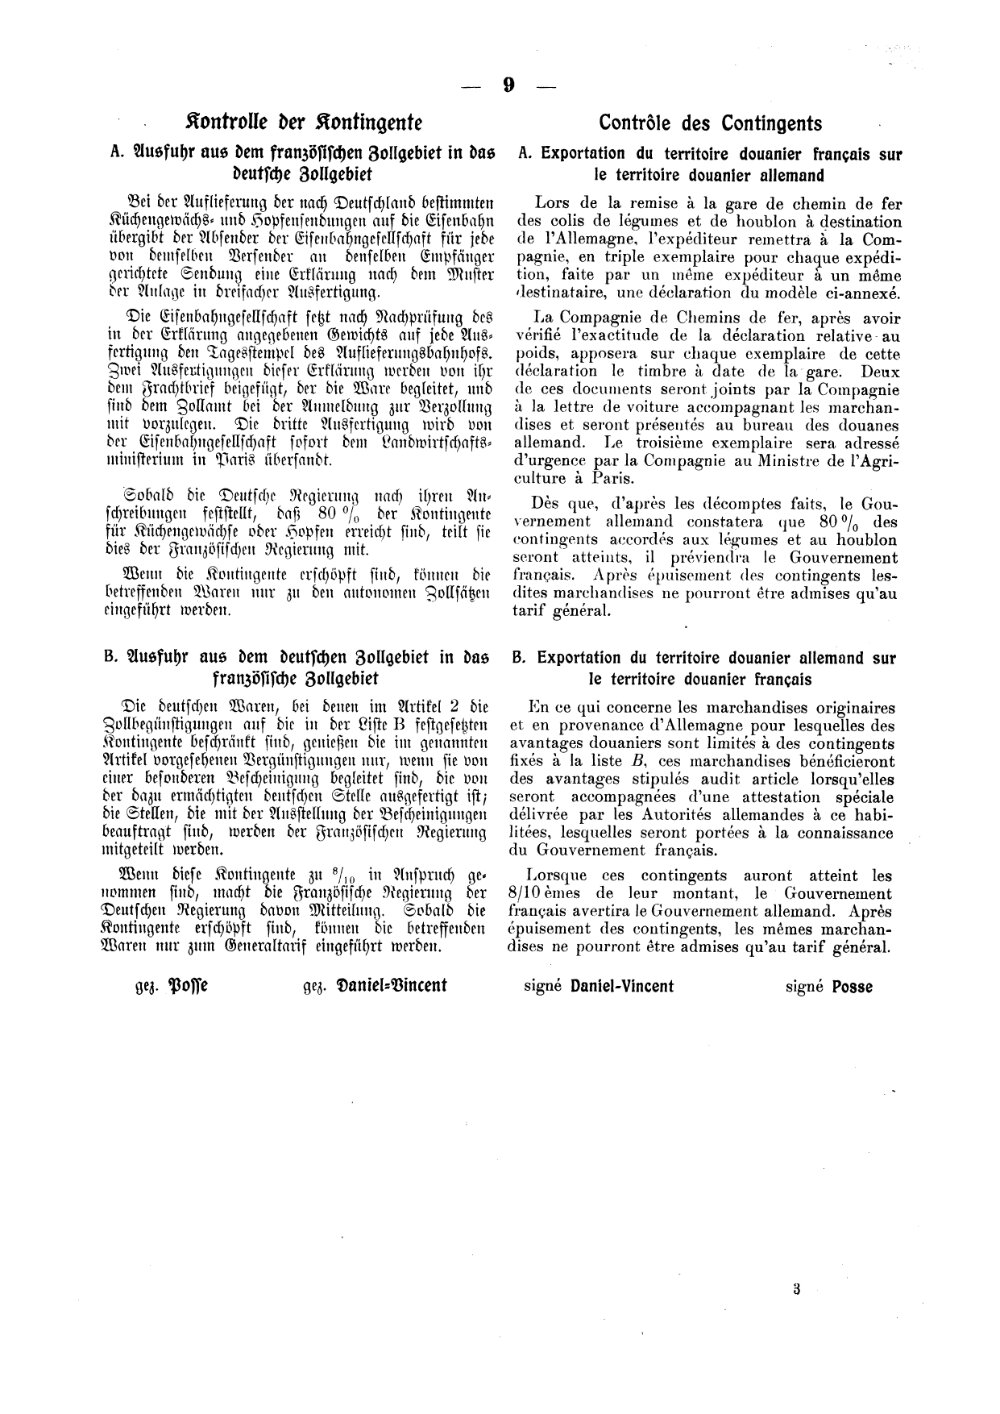 Scan of page 9